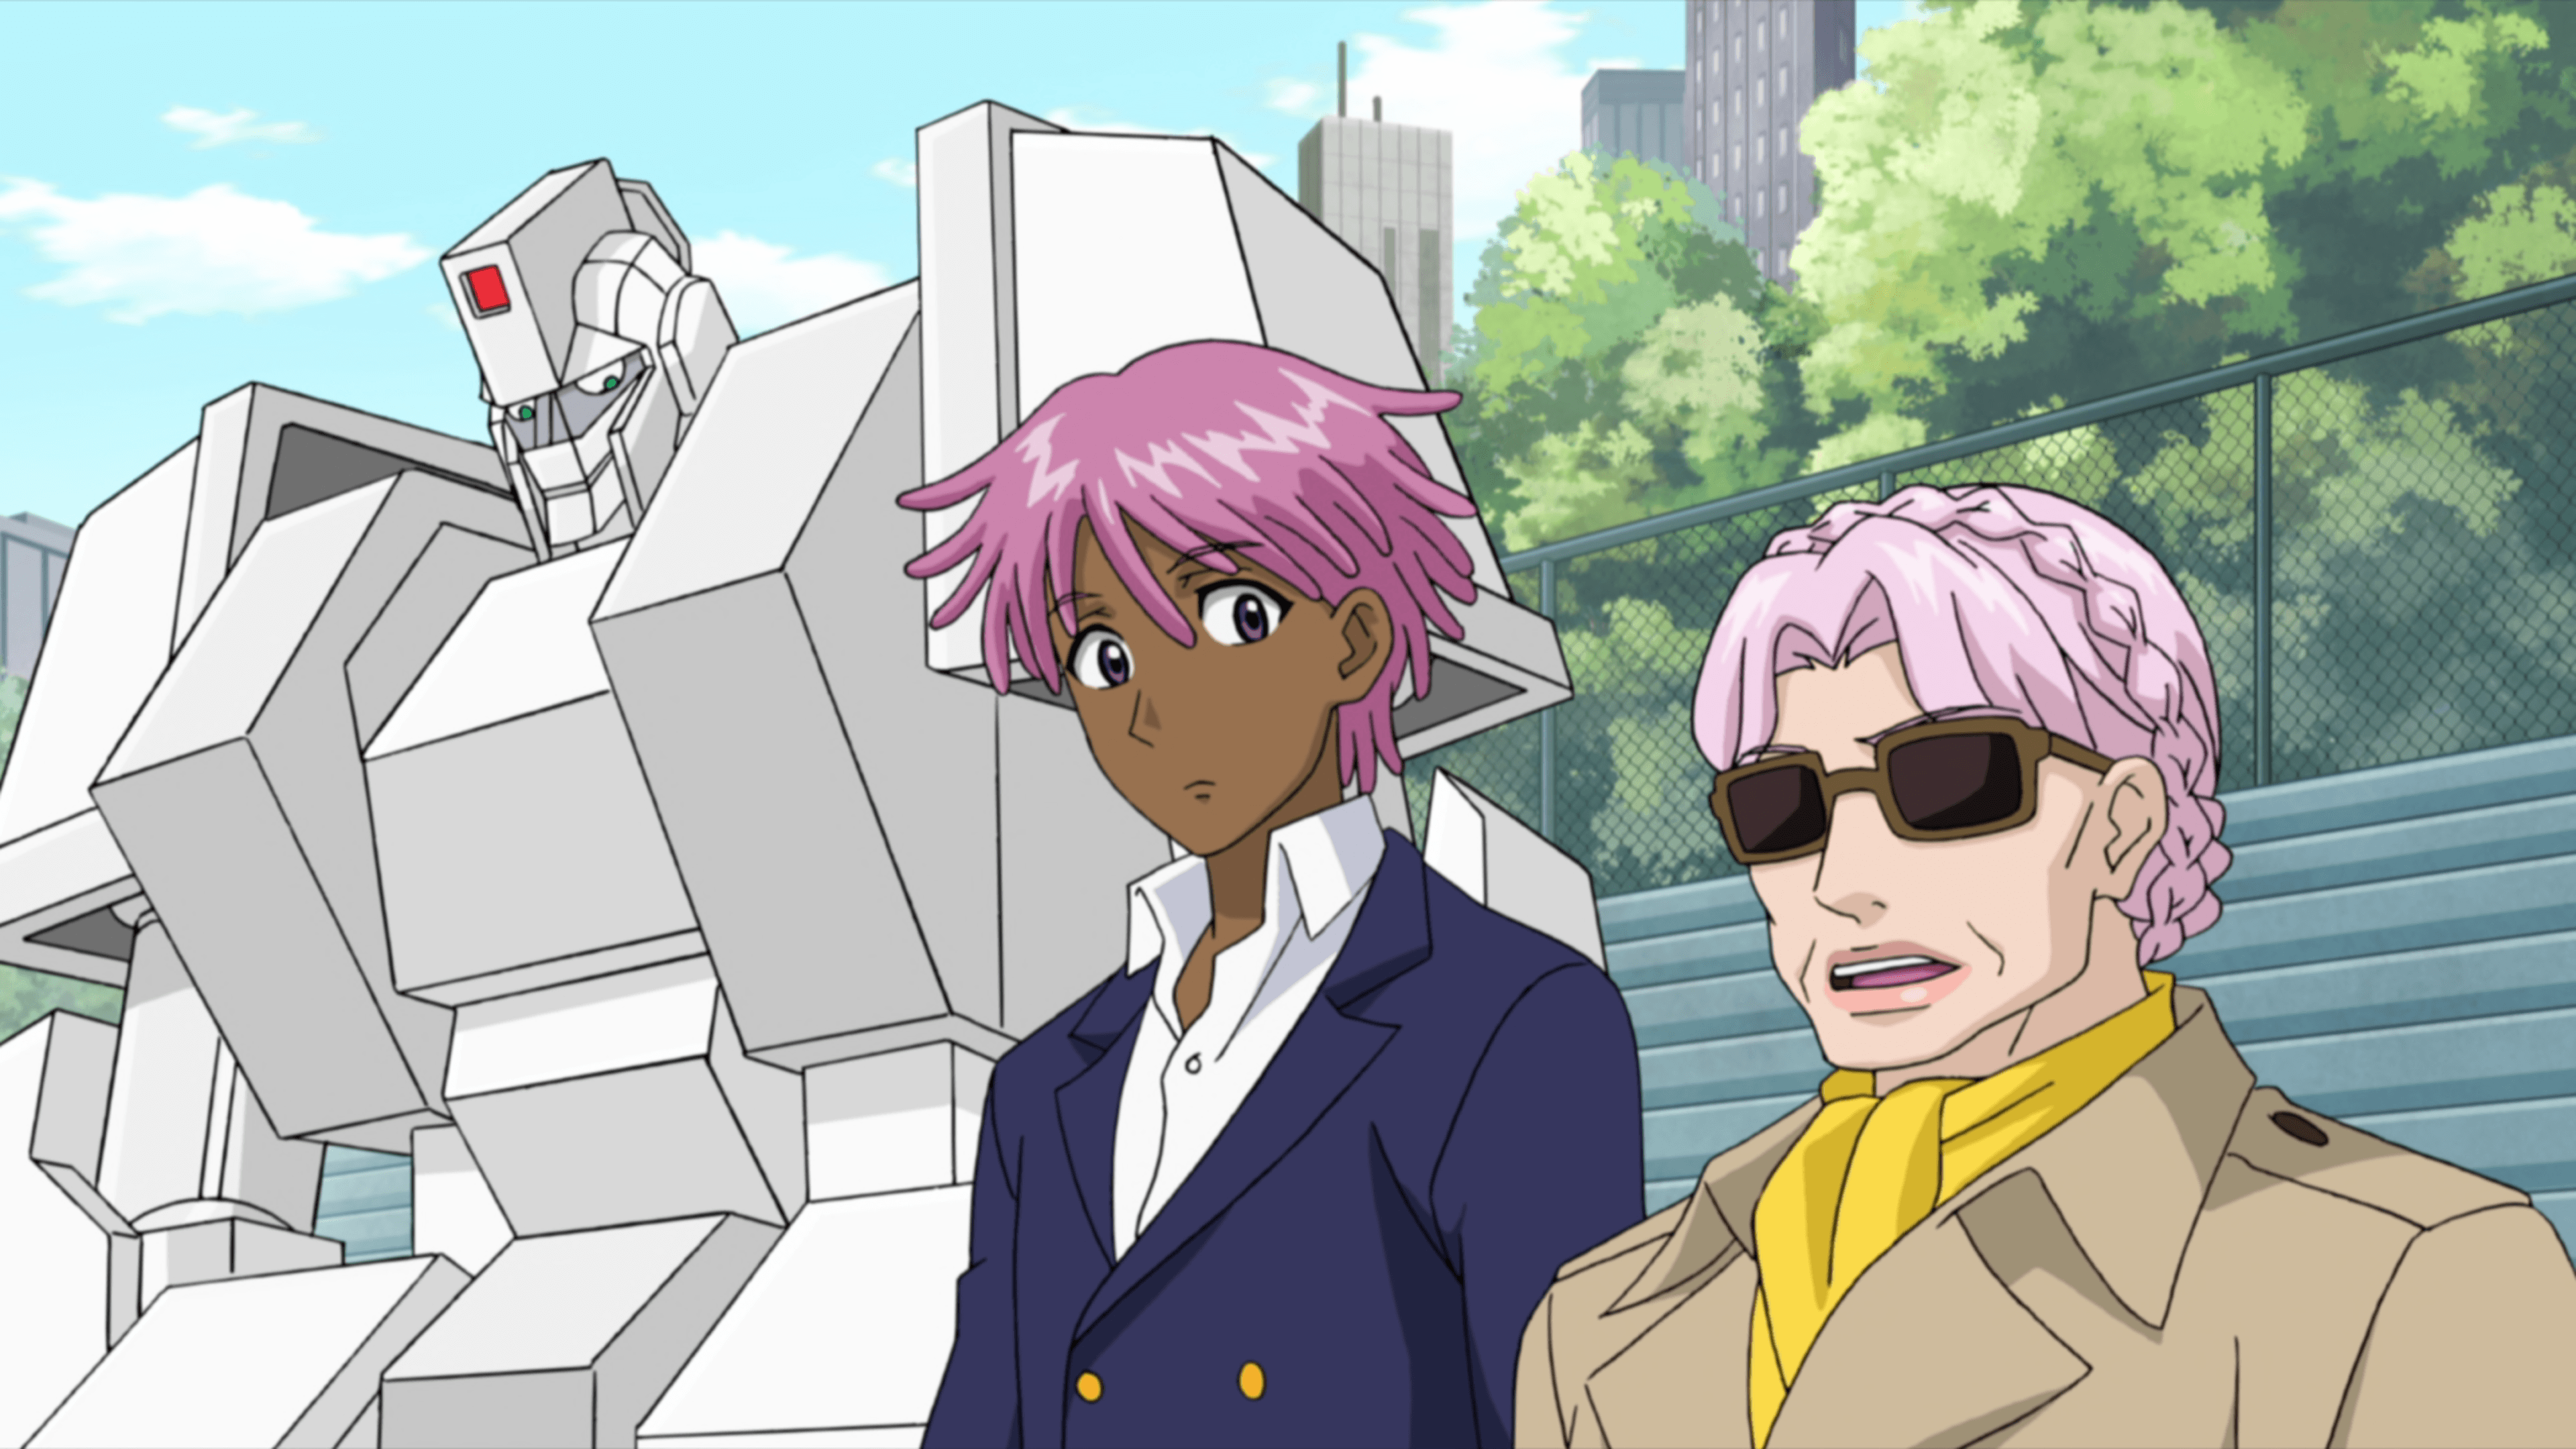 NETFLIX'S 'NEO YOKIO' FAILS TO DELIVER ON ITS PROMISE